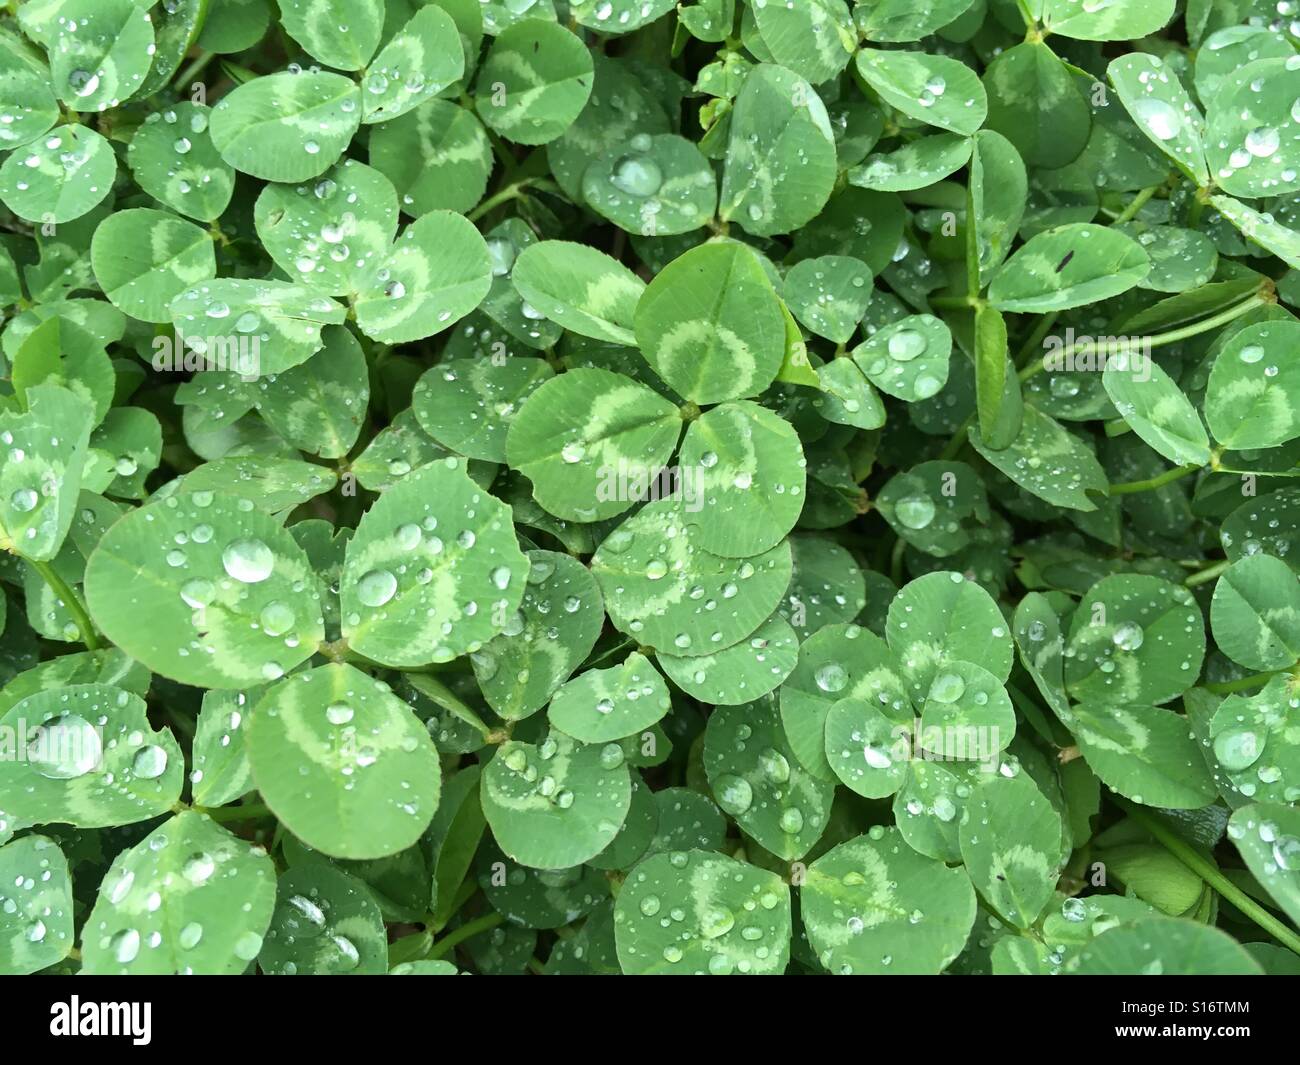 Clover and raindrops Stock Photo